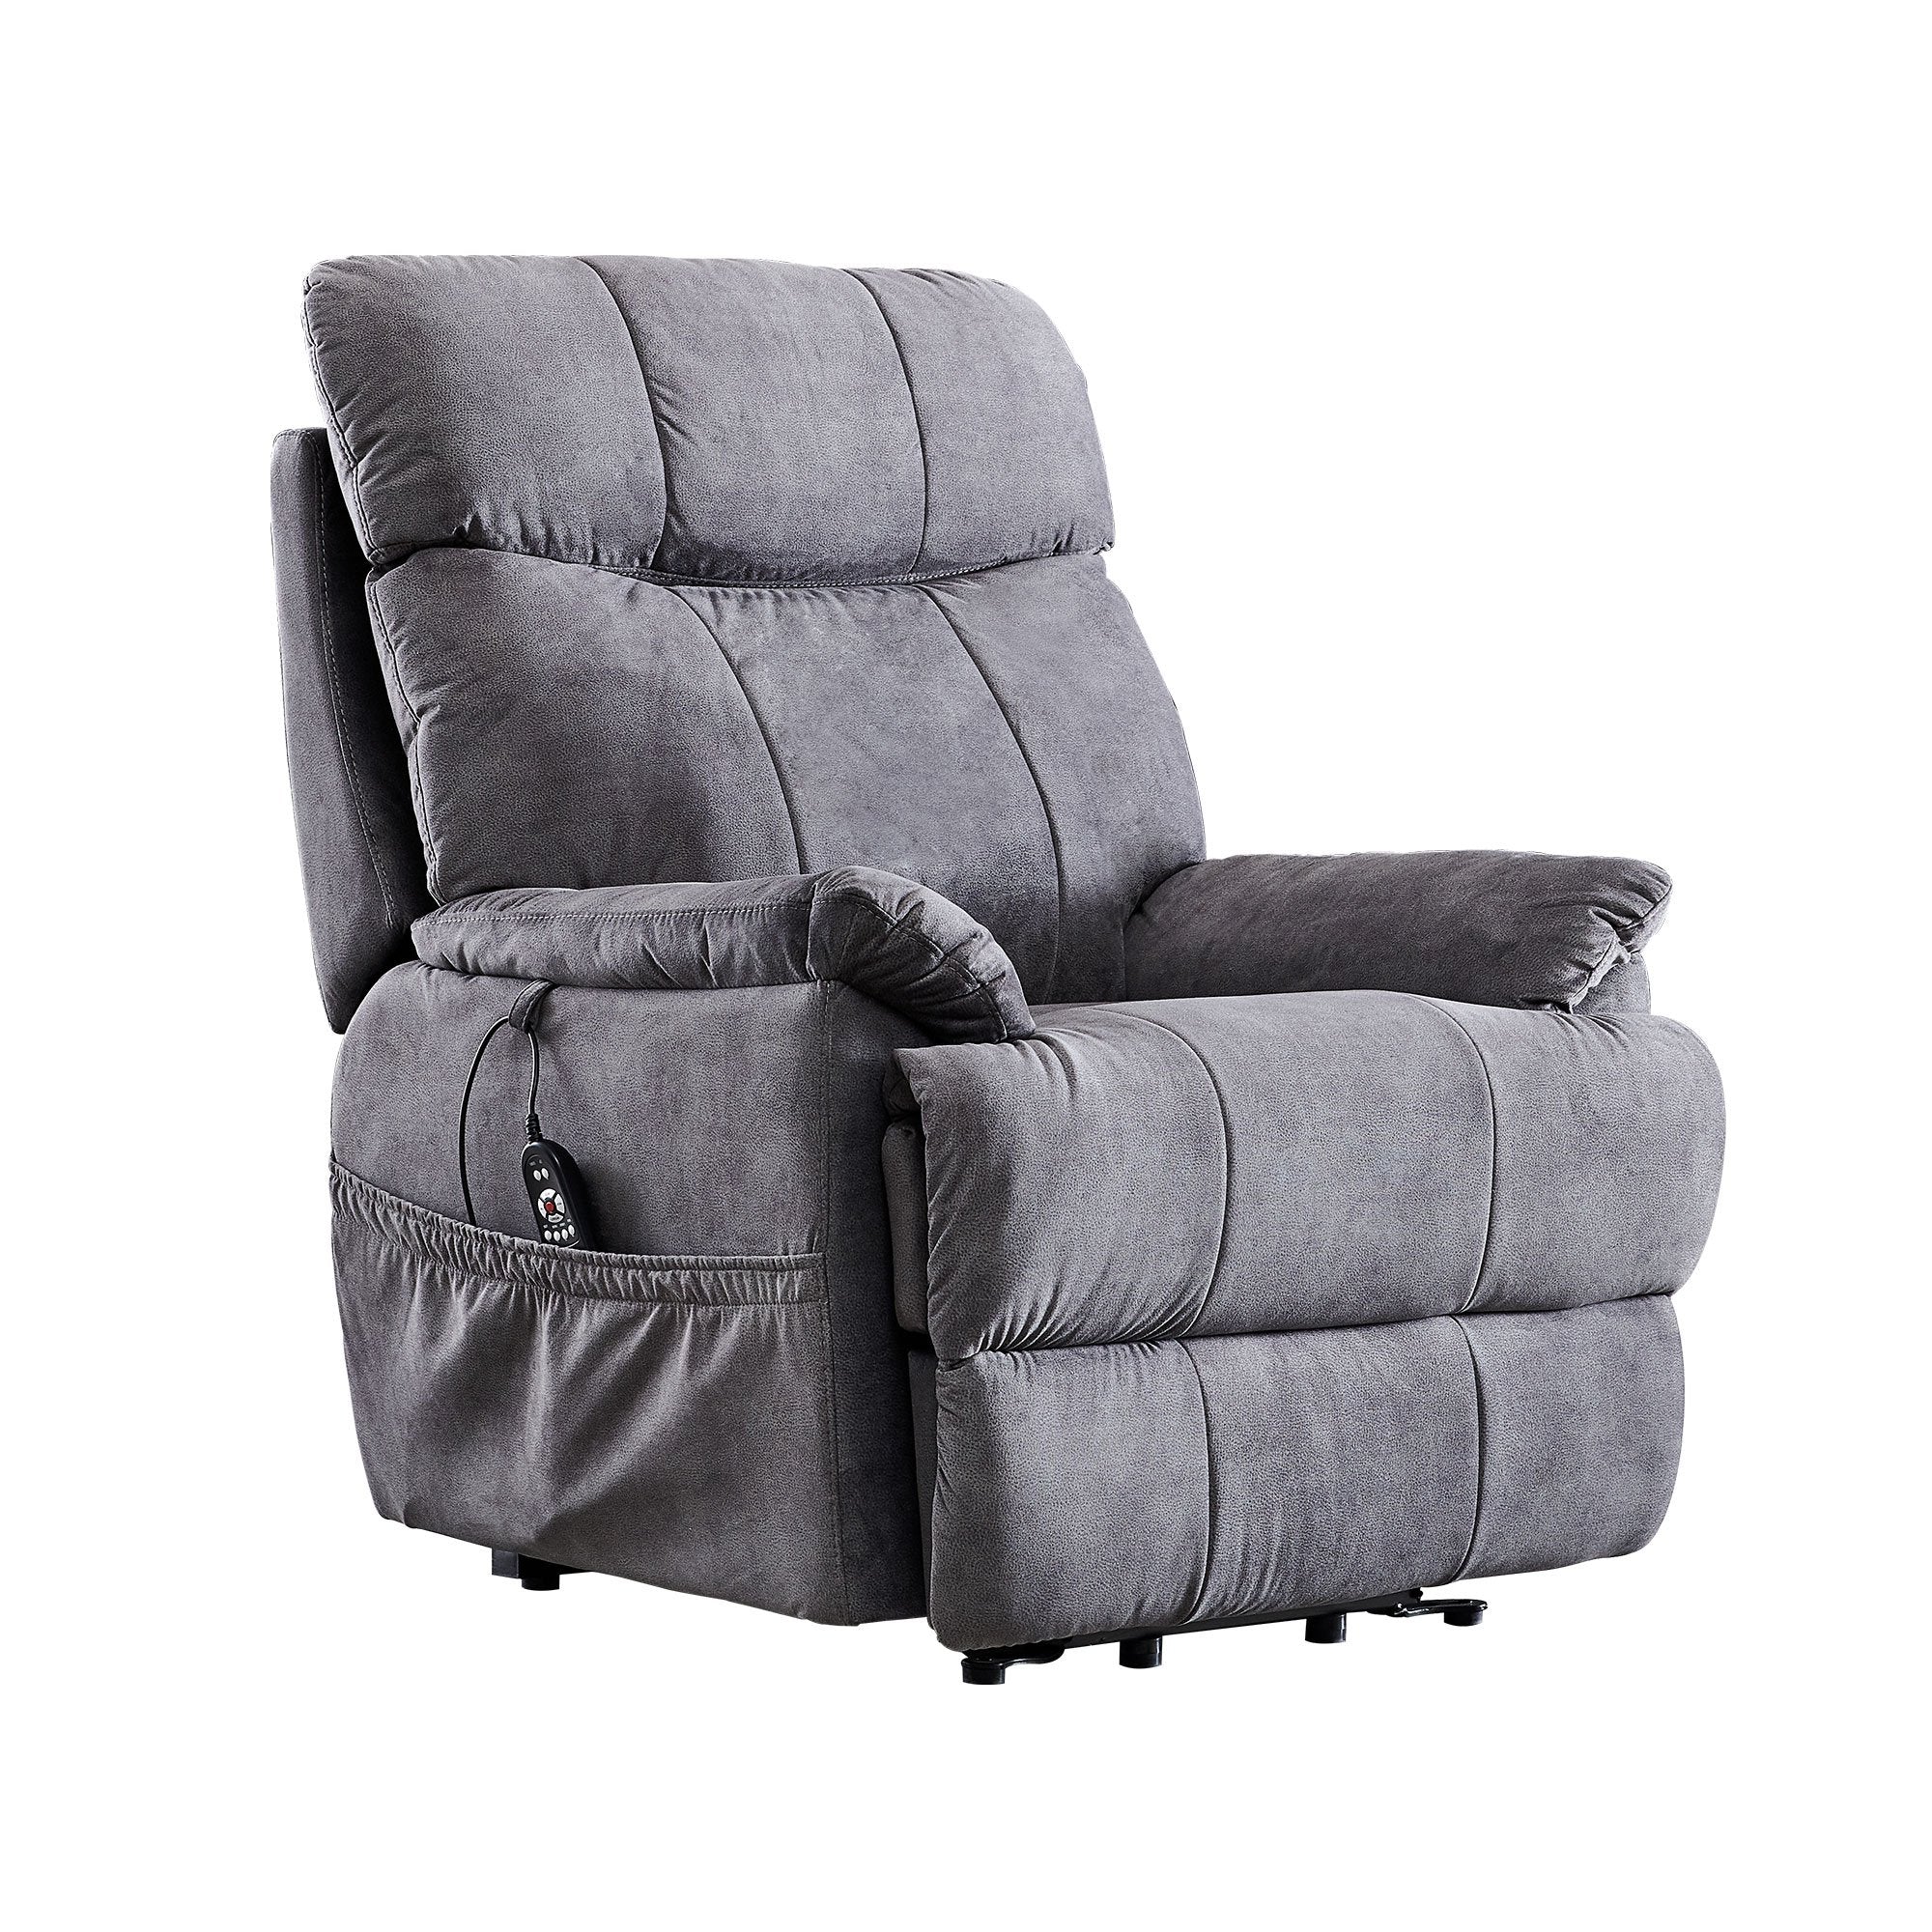 8 Points Massage and Heat Large Power Lift Recliner Chair with Remote Control